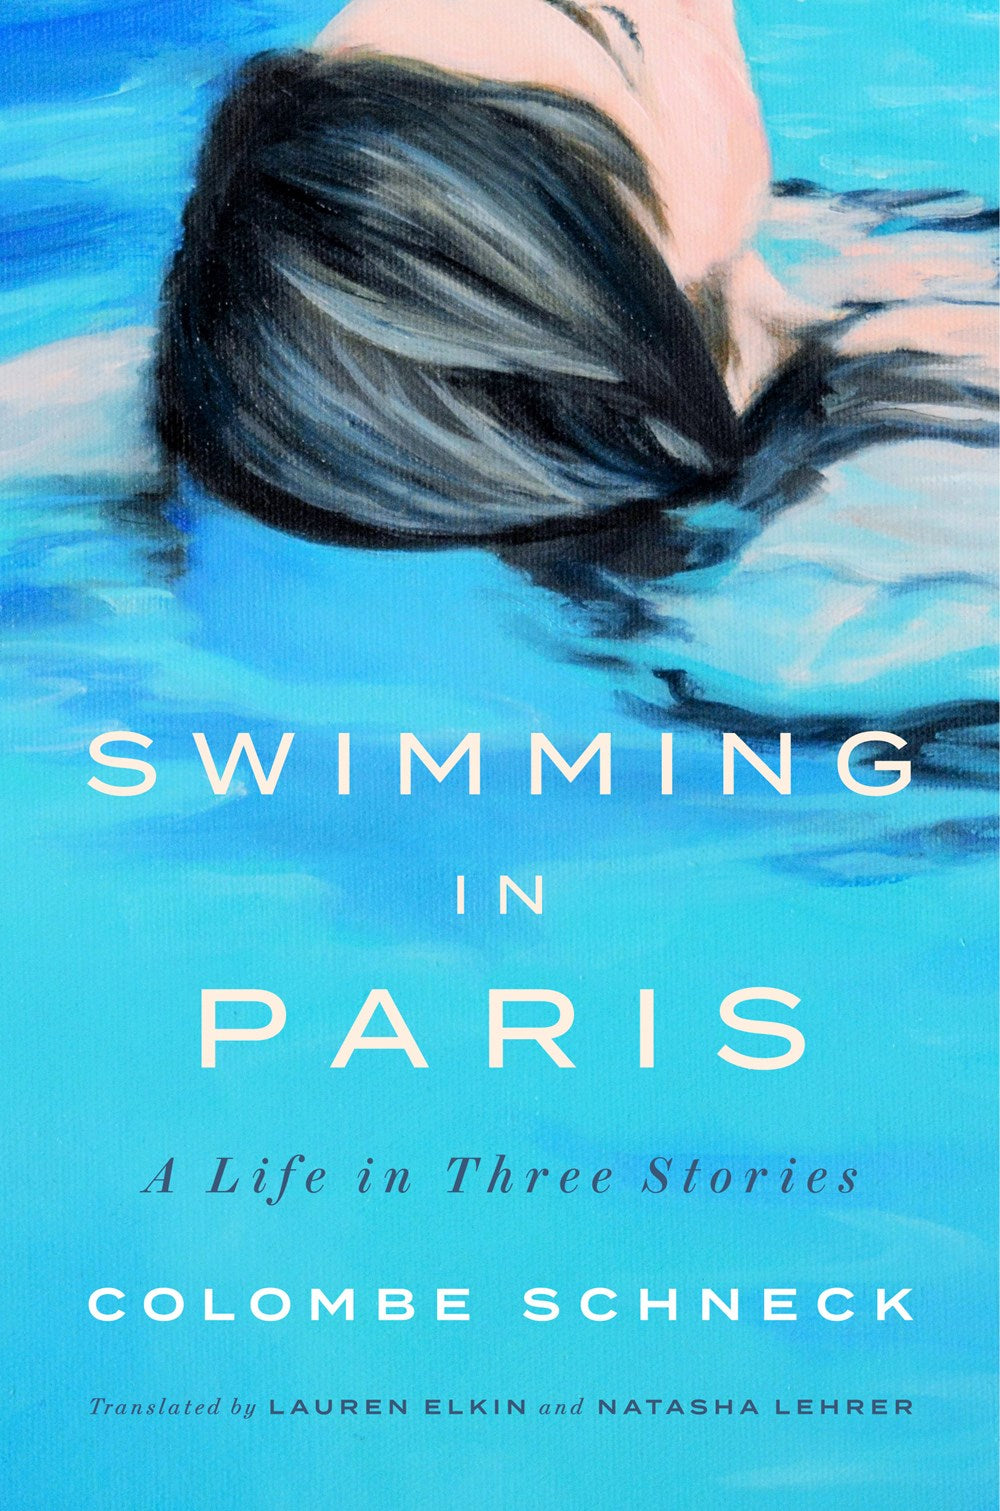 Swimming in Paris: A Life in Three Stories by Colombe Schneck (5/14/24)